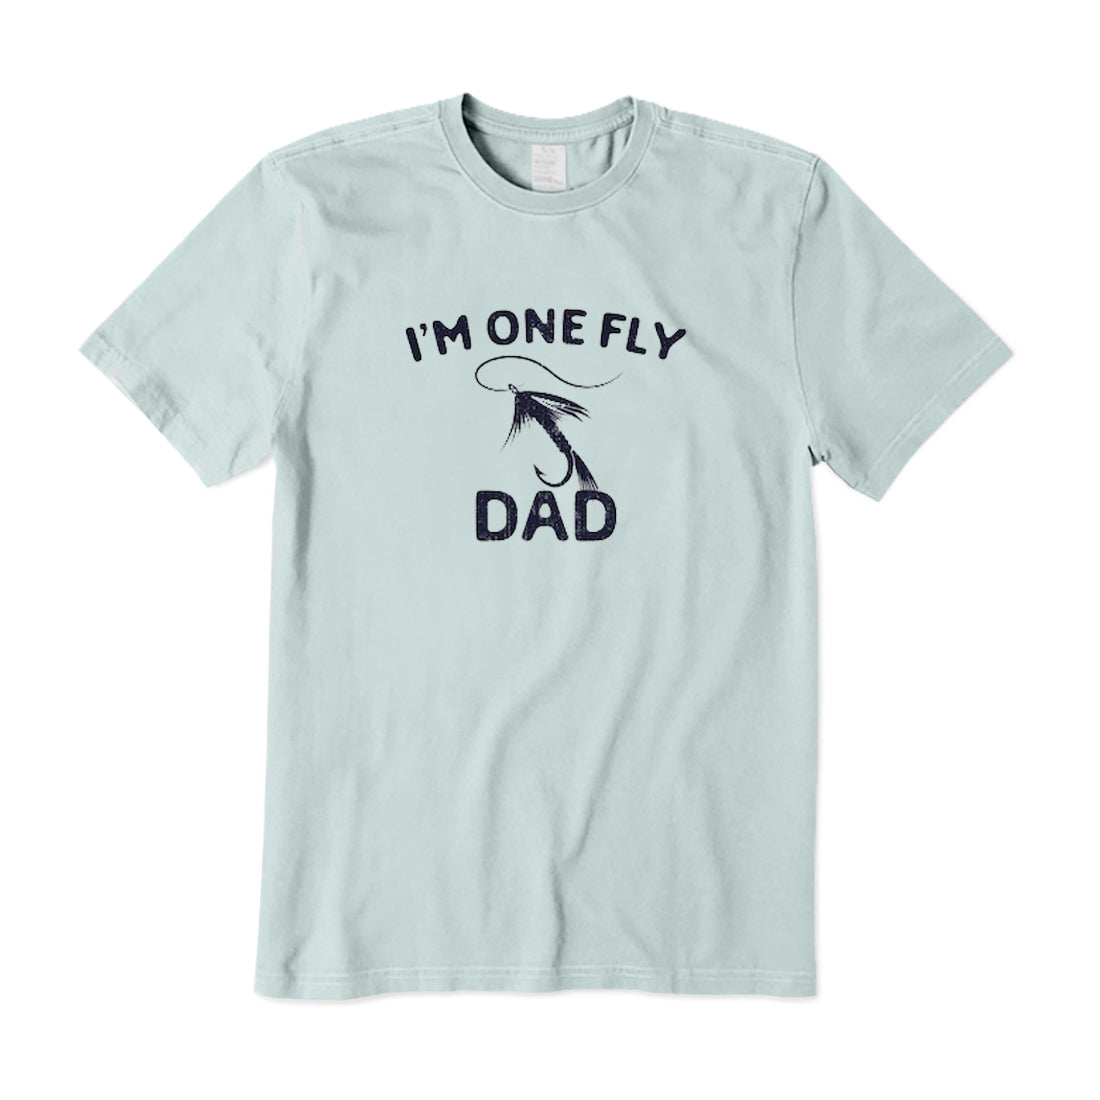 I'm One Fly Dad T-Shirt